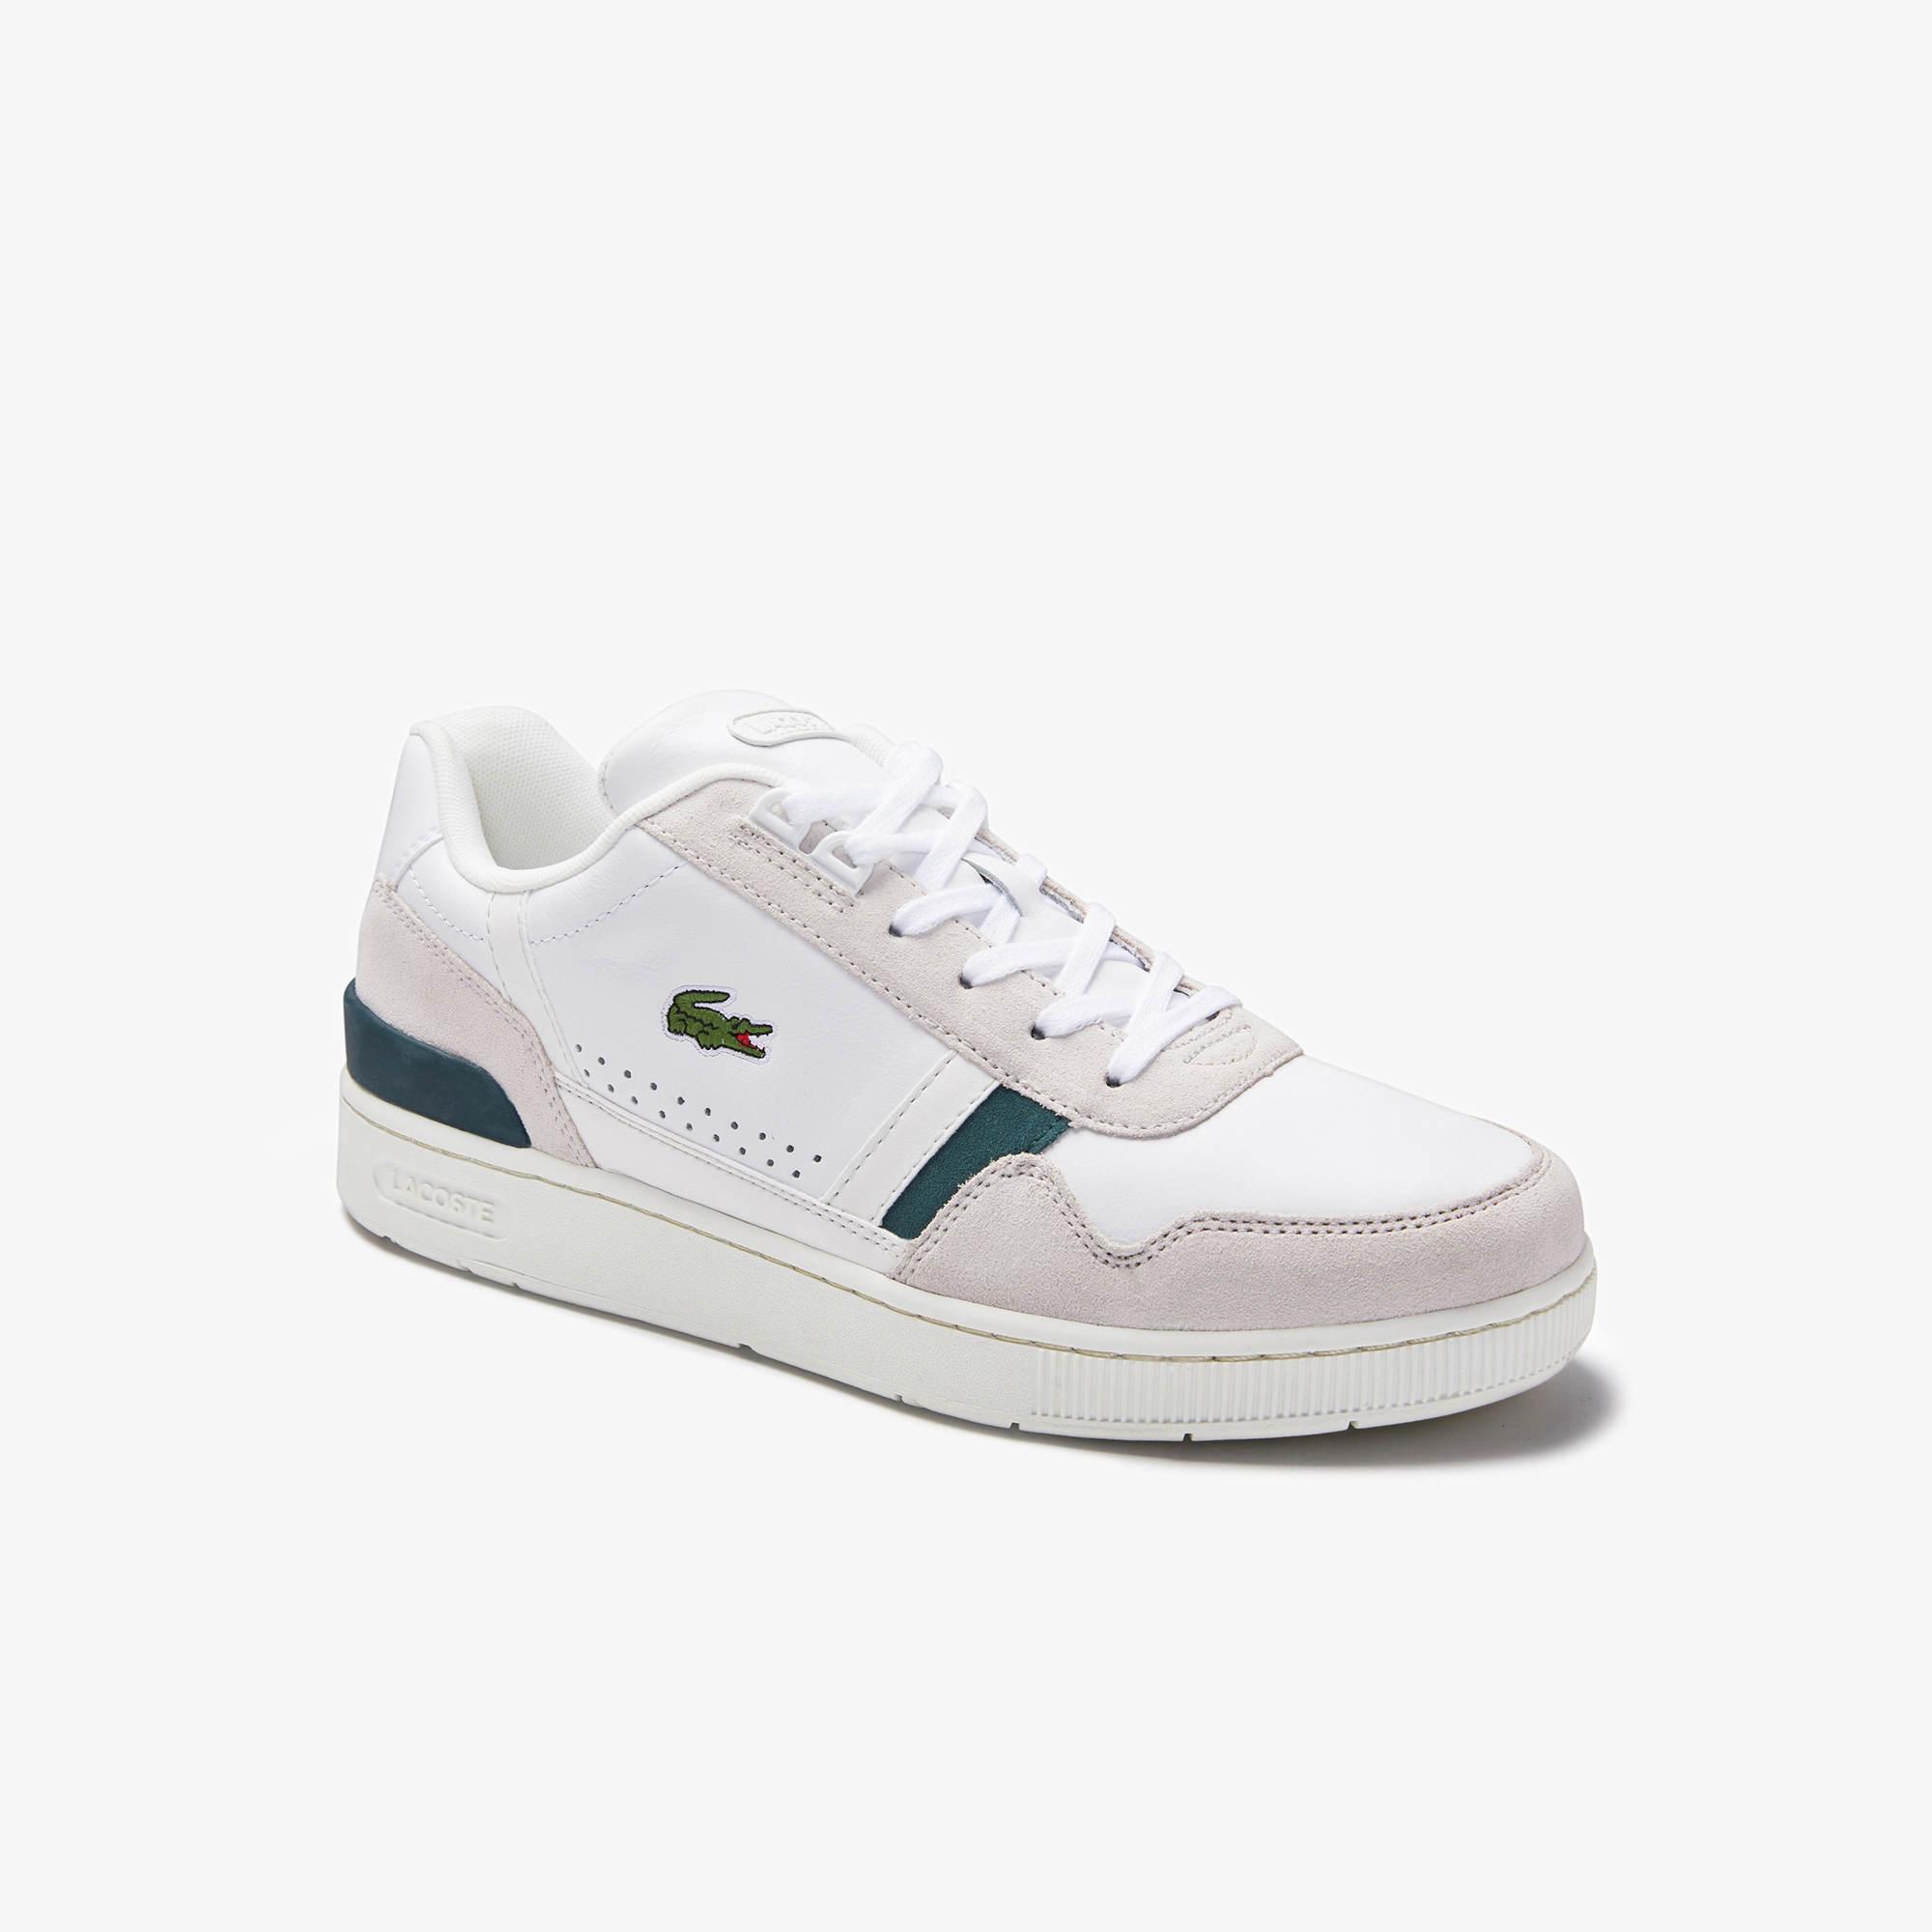 lacoste mens high top shoes